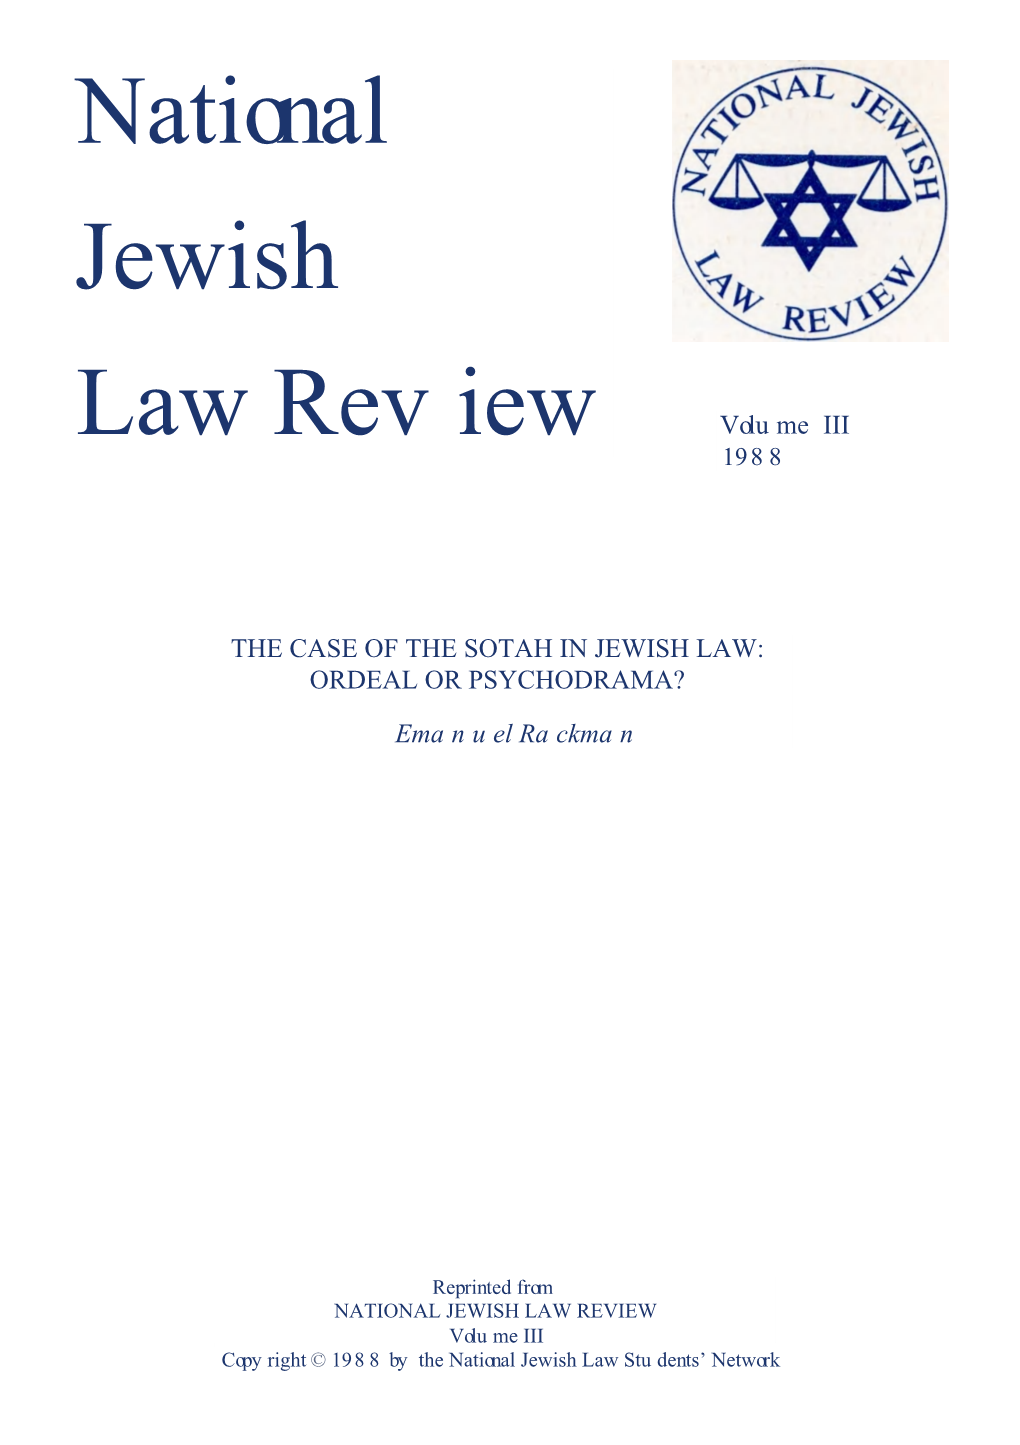 NATIONAL JEWISH LAW REVIEW Volume III Copyright © 1988 by the National Jewish Law Students’ Network the CASE of the SOTAH in JEWISH LAW: ORDEAL OR PSYCHODRAMA?